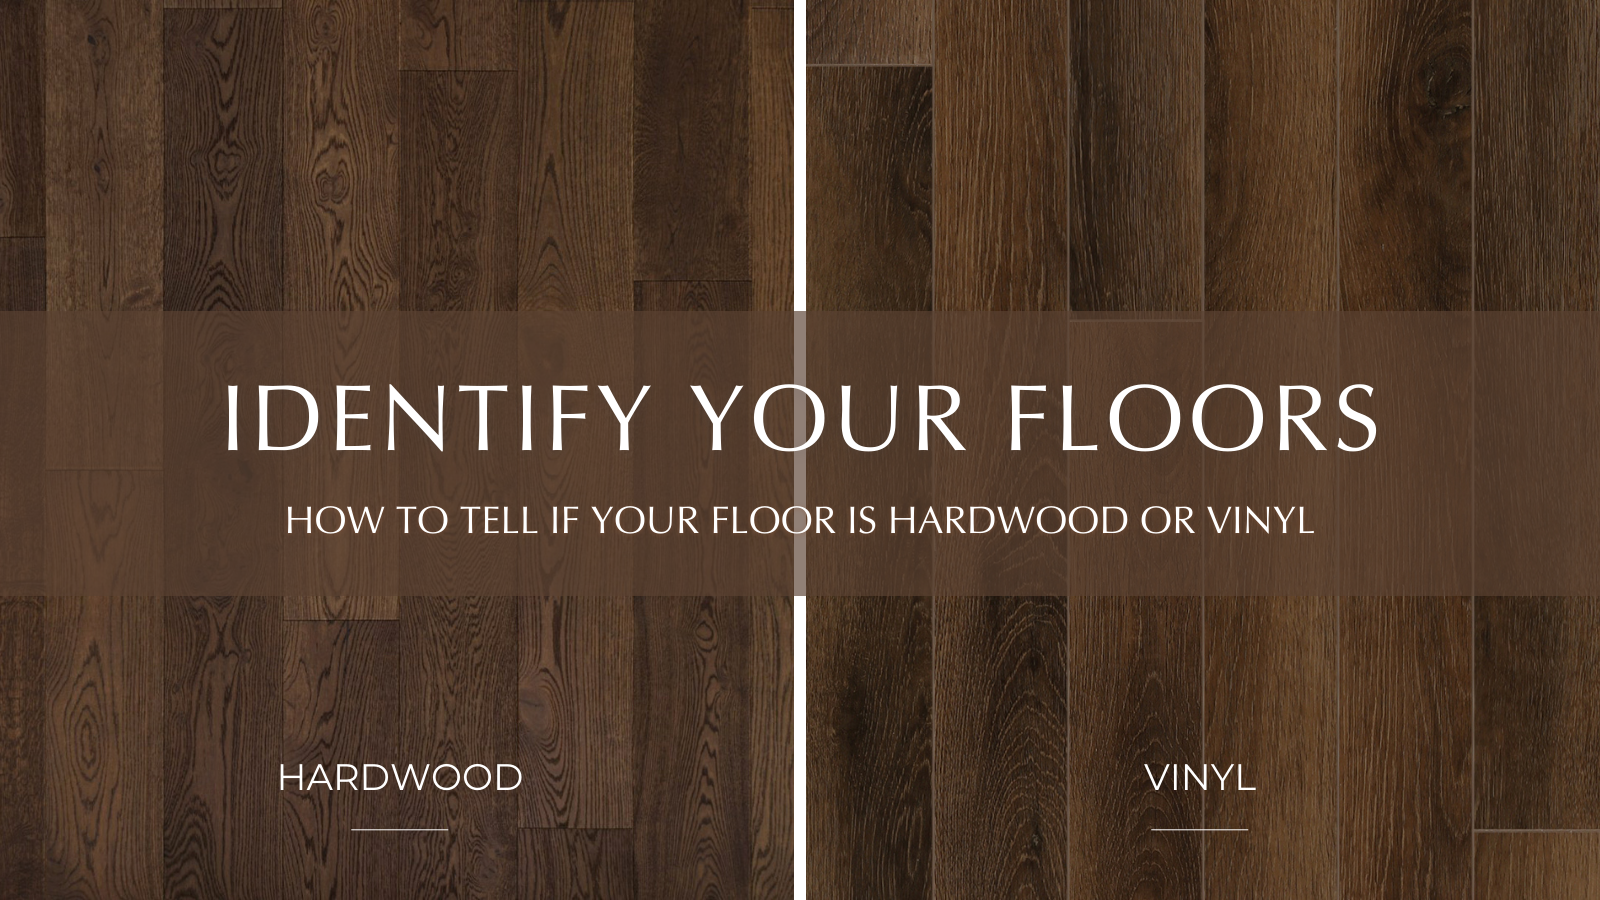 https://www.garrisoncollection.com/wordpress/wp-content/uploads/2022/09/xBlog-Banner-for-How-to-Tell-if-Your-Floor-is-Hardwood-or-Vinyl-Garrison-Collection.png.pagespeed.ic.gPwyT1qXQJ.jpg